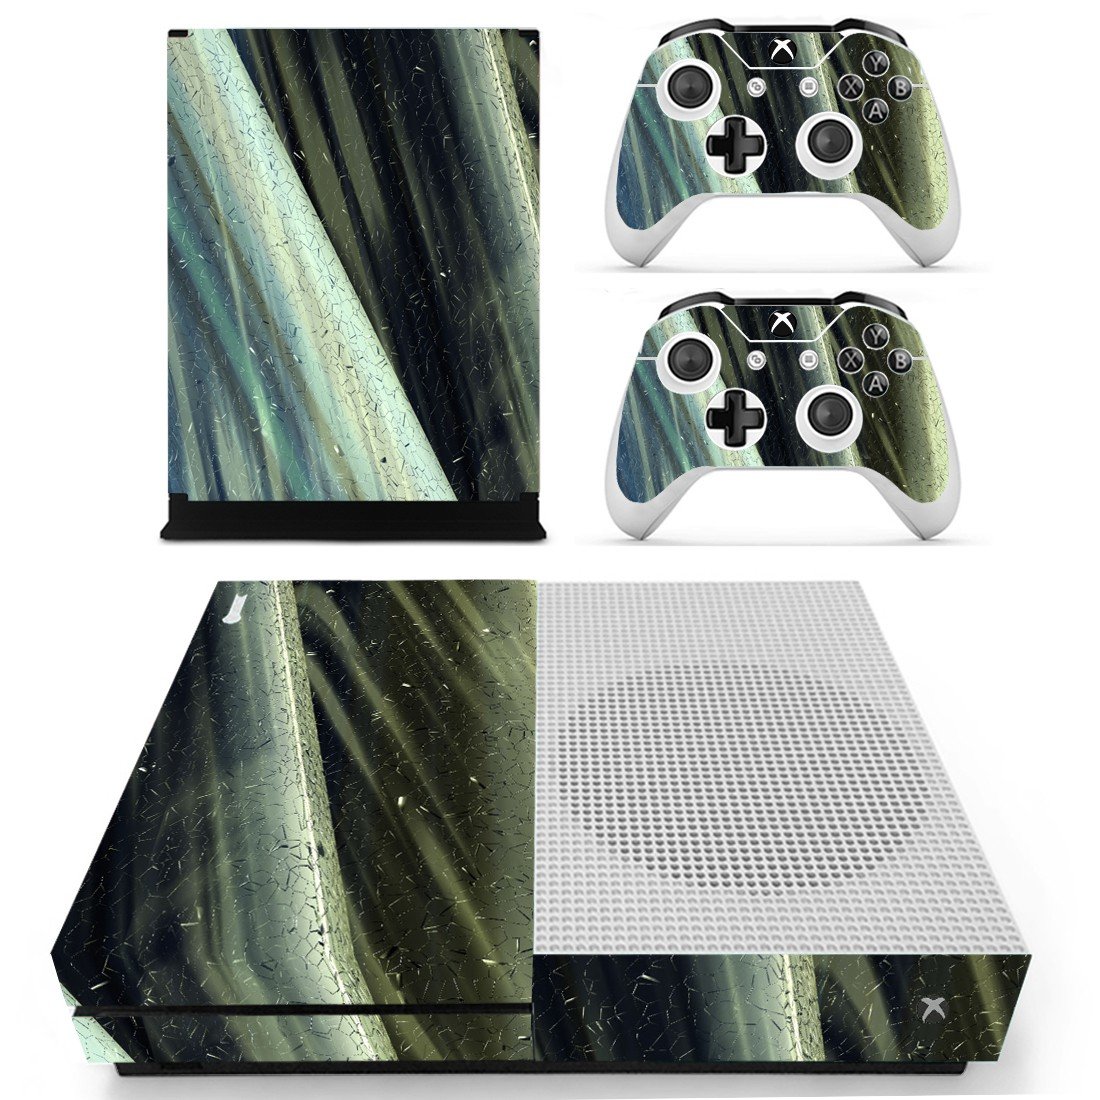 Xbox One S And Controllers Skin Cover Tech Design 2